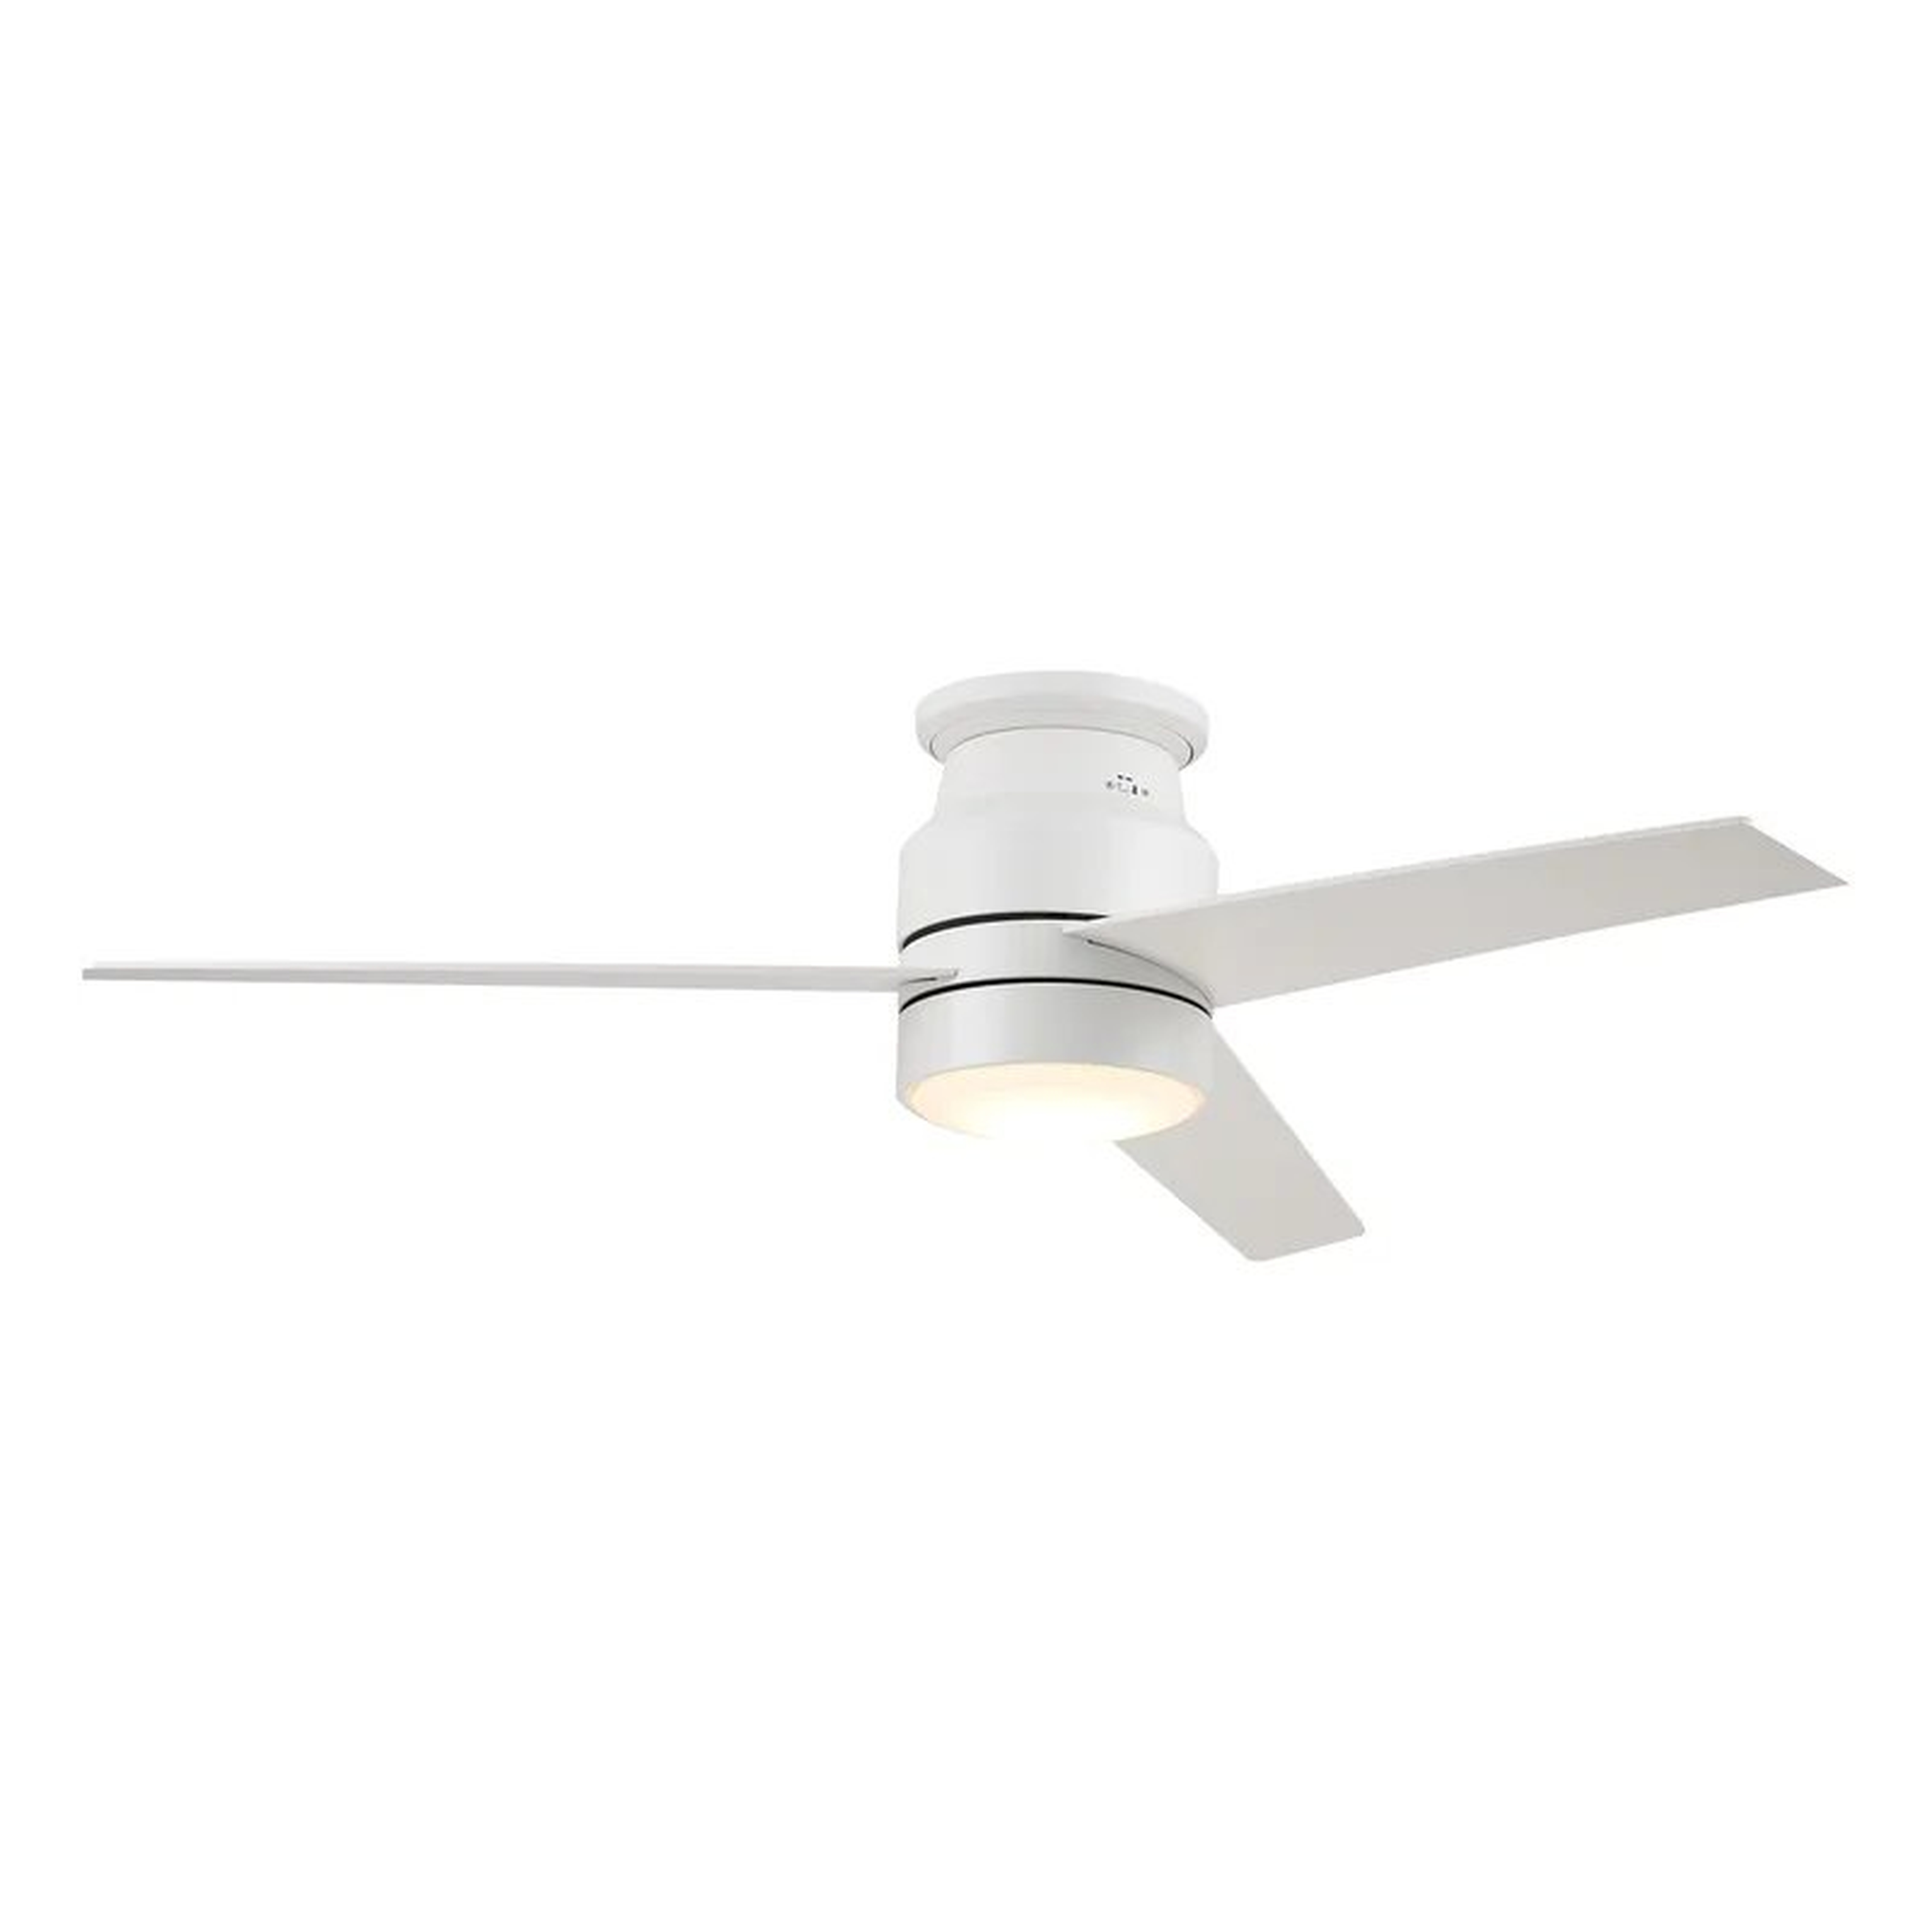 52" Betzi 3 - Blade LED Smart Propeller Ceiling Fan with Wall Control and Light Kit Included - Wayfair